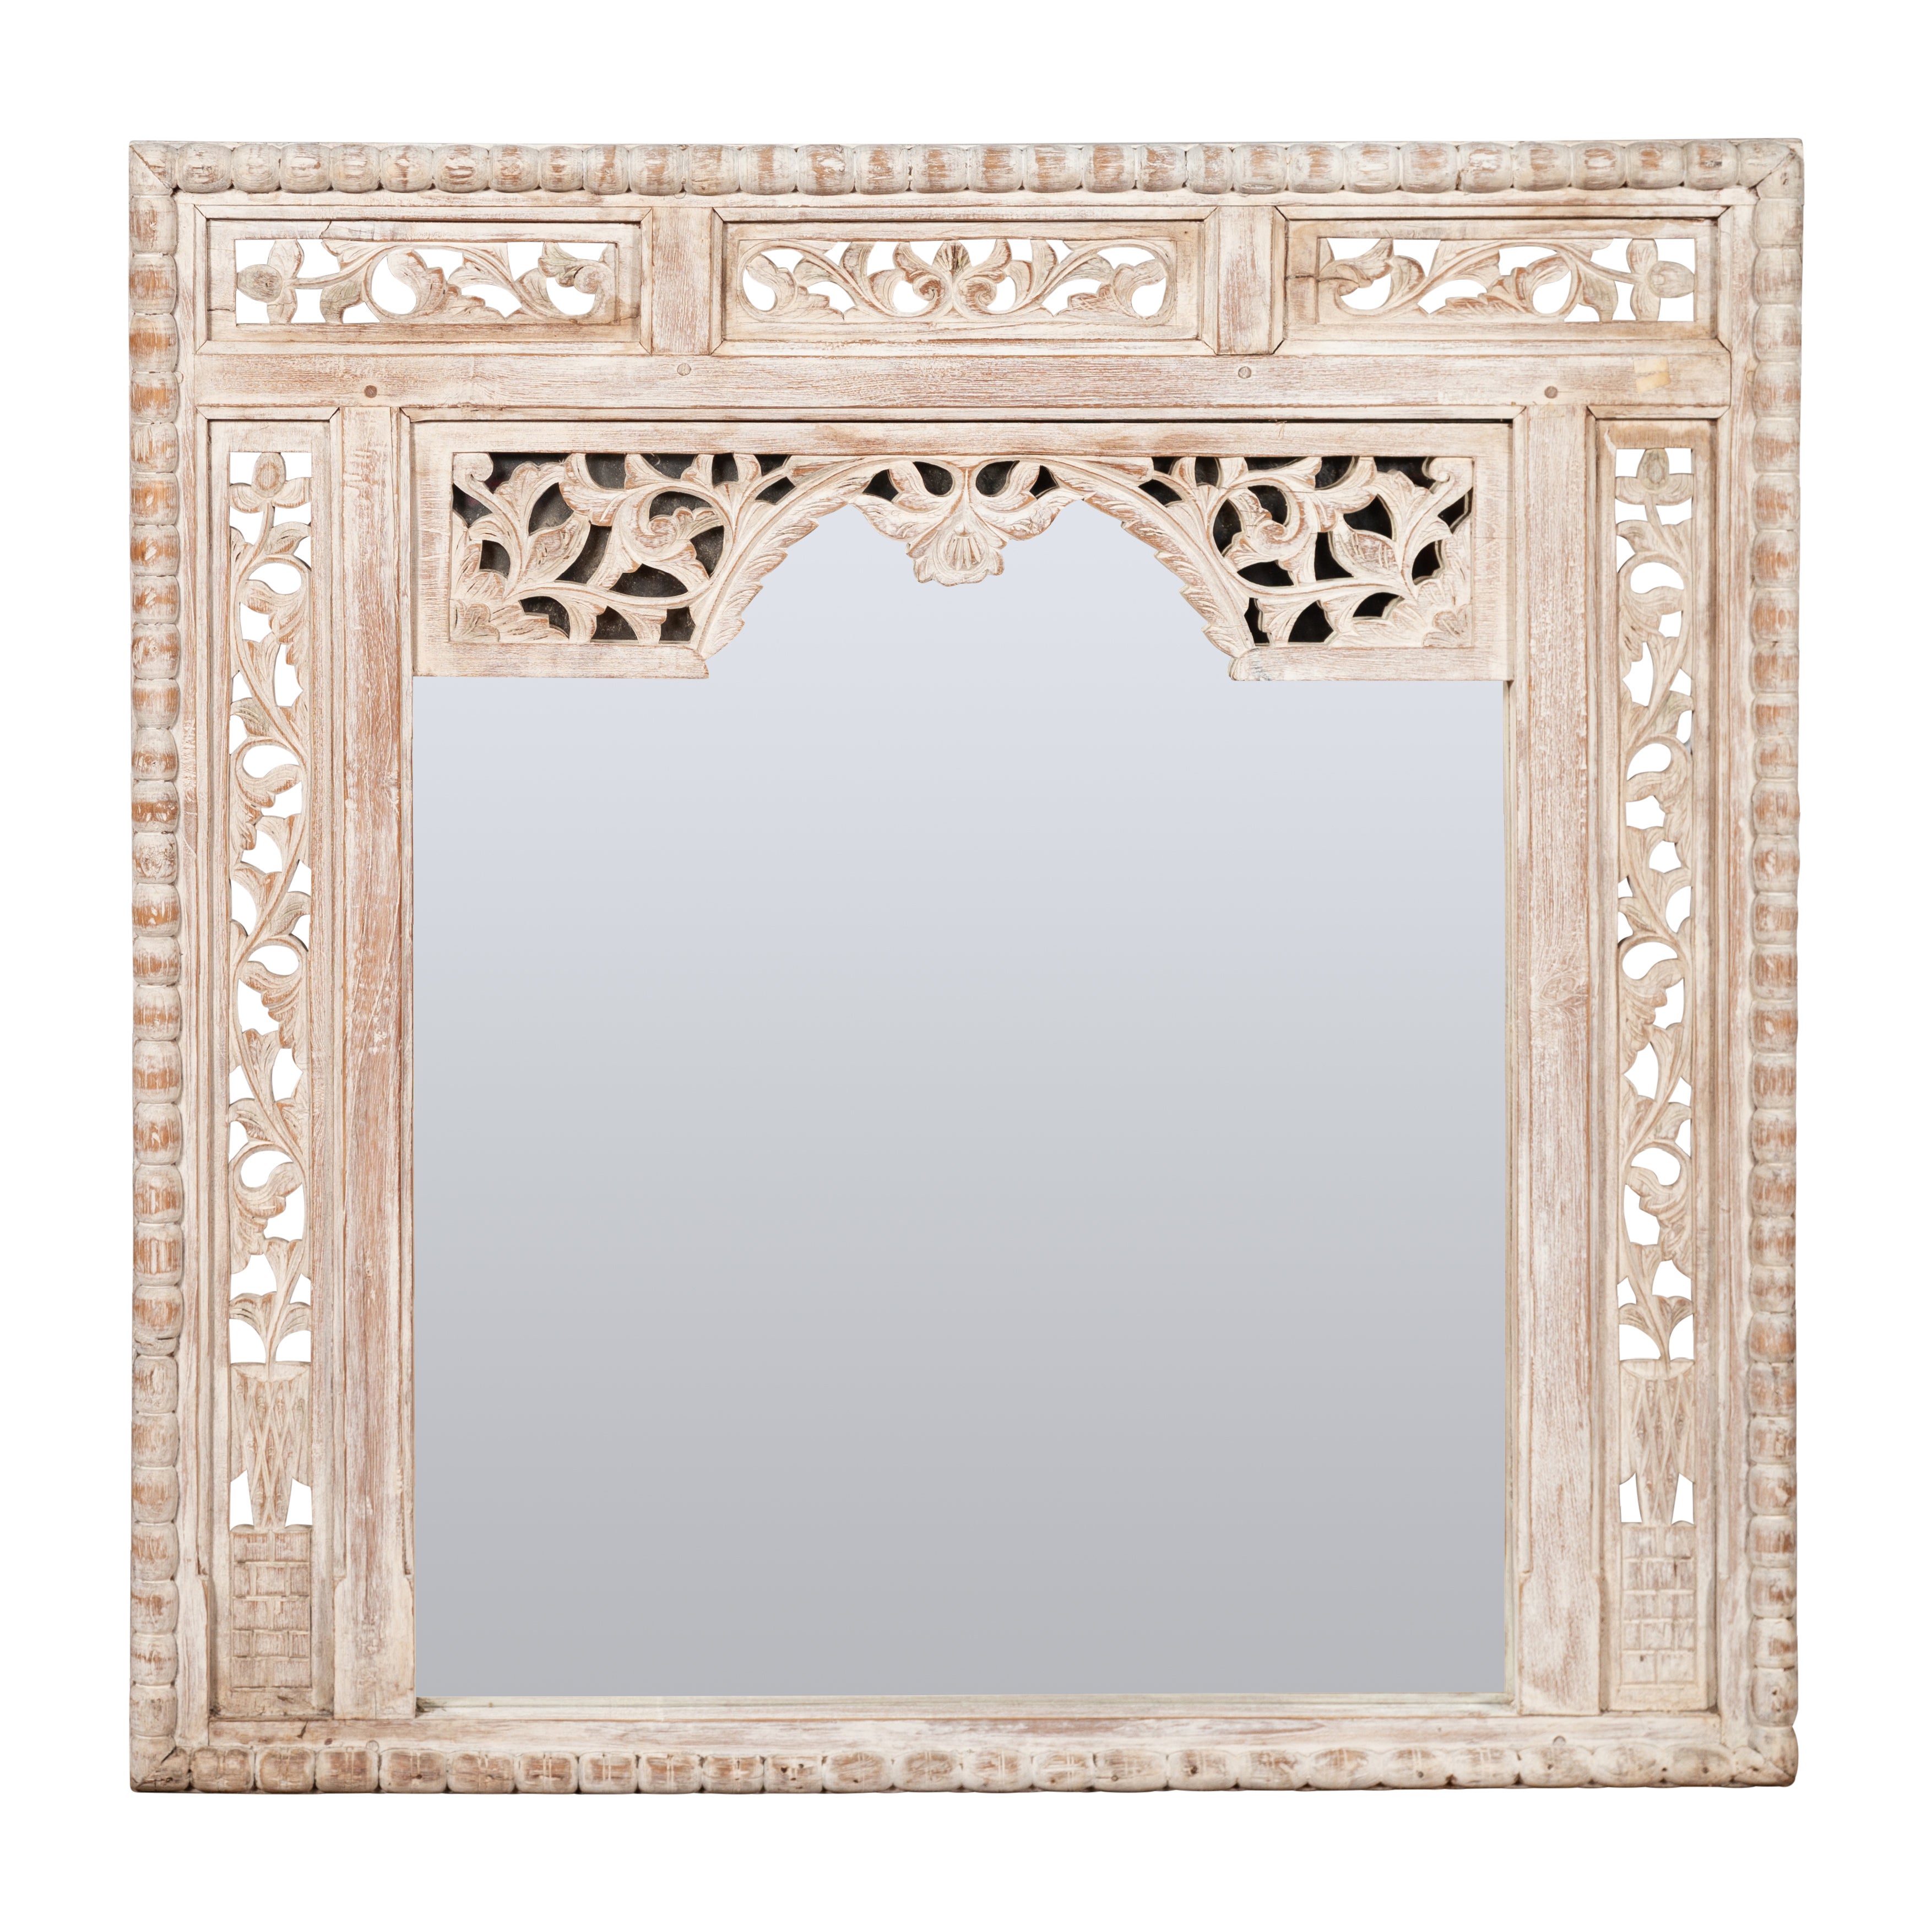 19th Century Painted Thai Mirror with Hand-Carved Scrolling Floral Décor